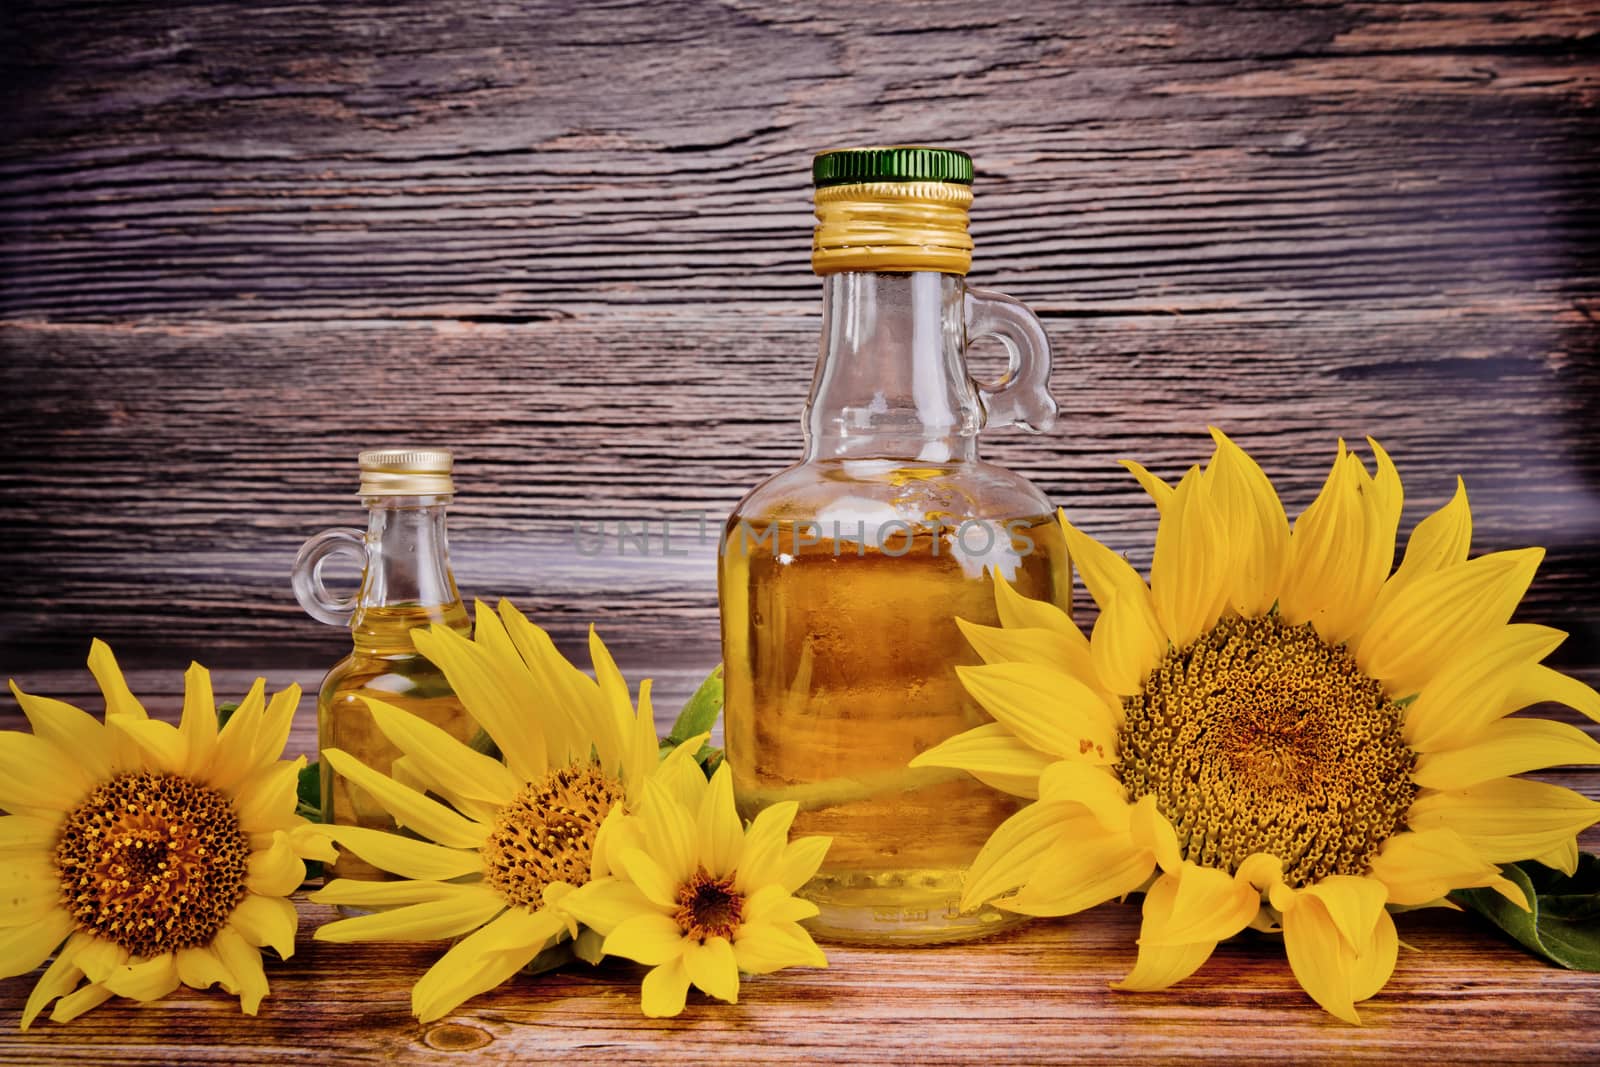 Two glass bottles with sunflower oil and flowers on wooden background. Studio shot.